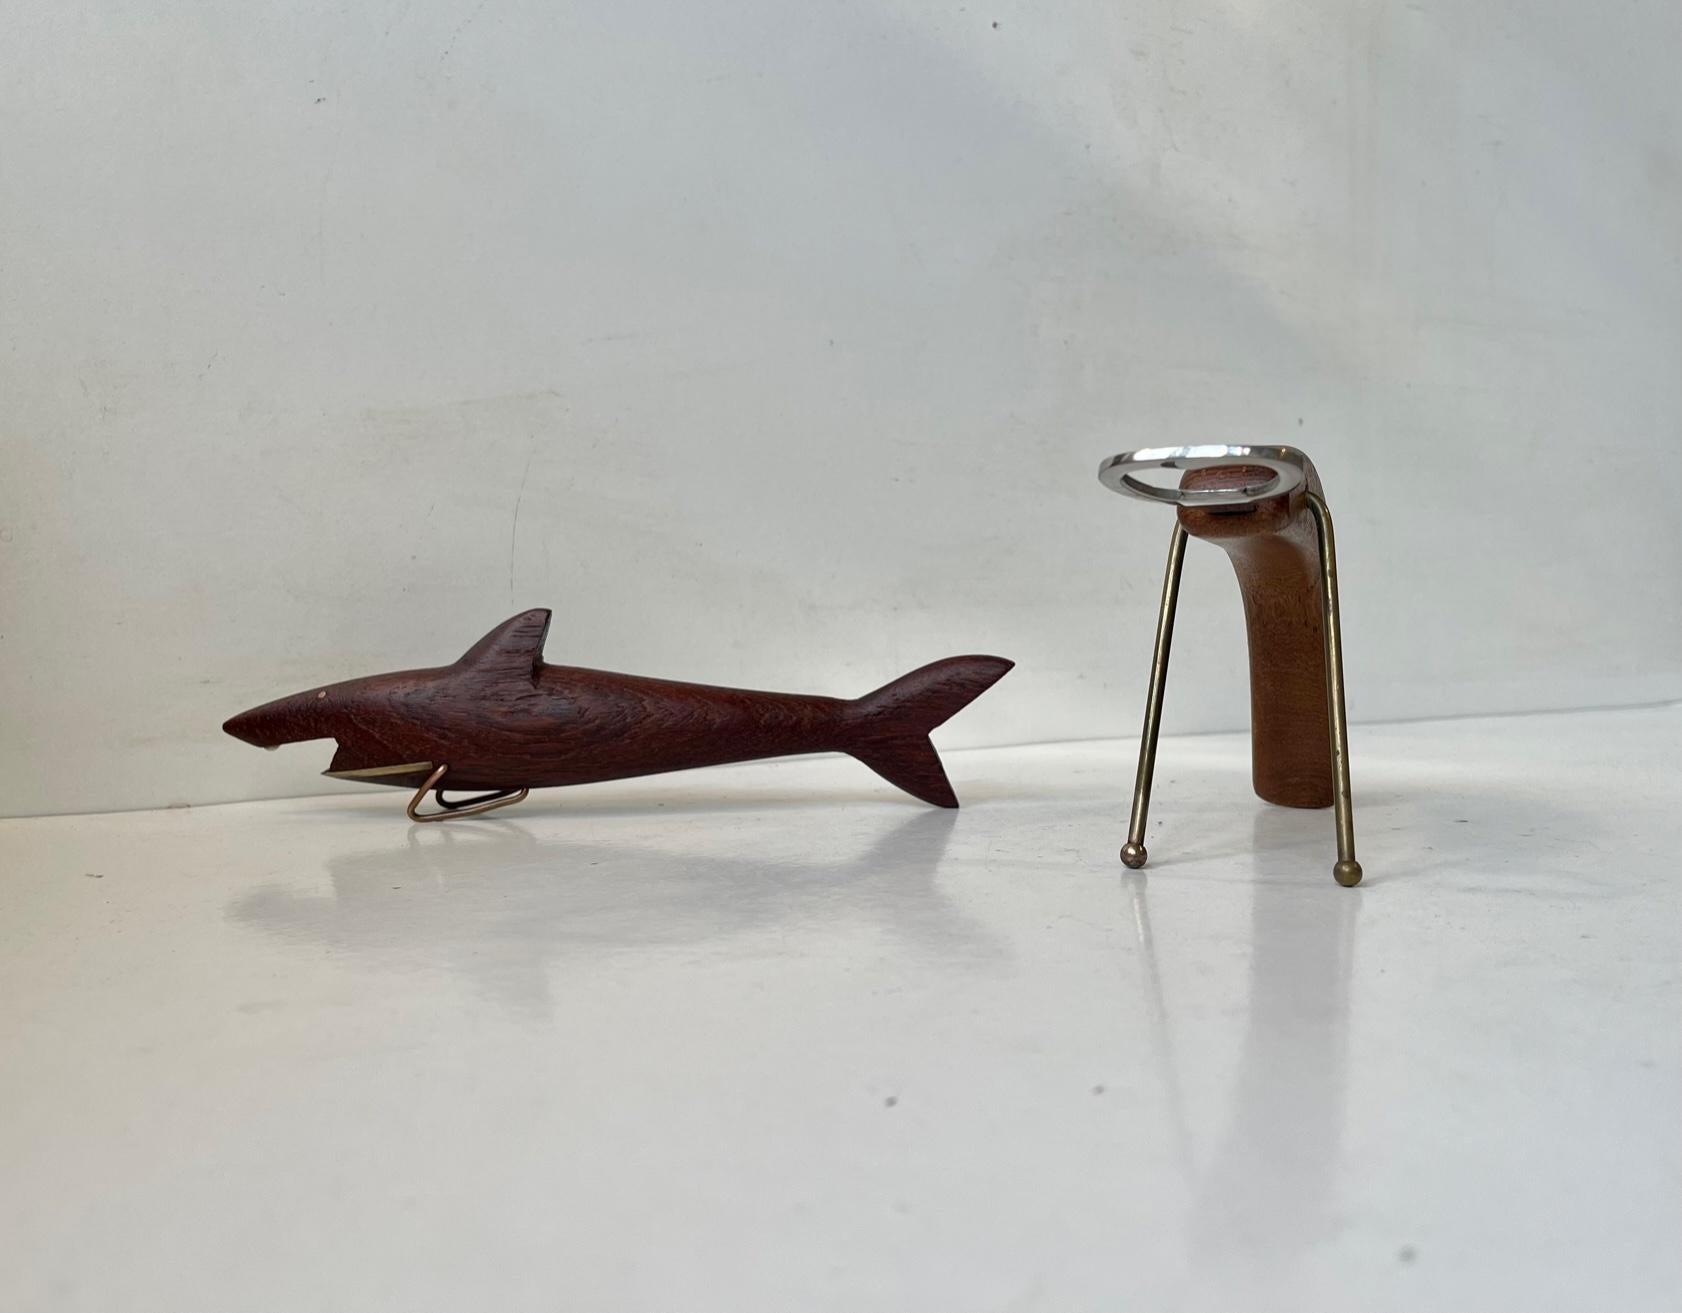 Figural Danish Modern Bottle openers in the shape and a shark and a lobster. Materials: solid teak, brass, copper and stainless steel. Made in Denmark circa 1960-70 in as style reminiscent of Wiener Werkstatte. The price is for both pieces.